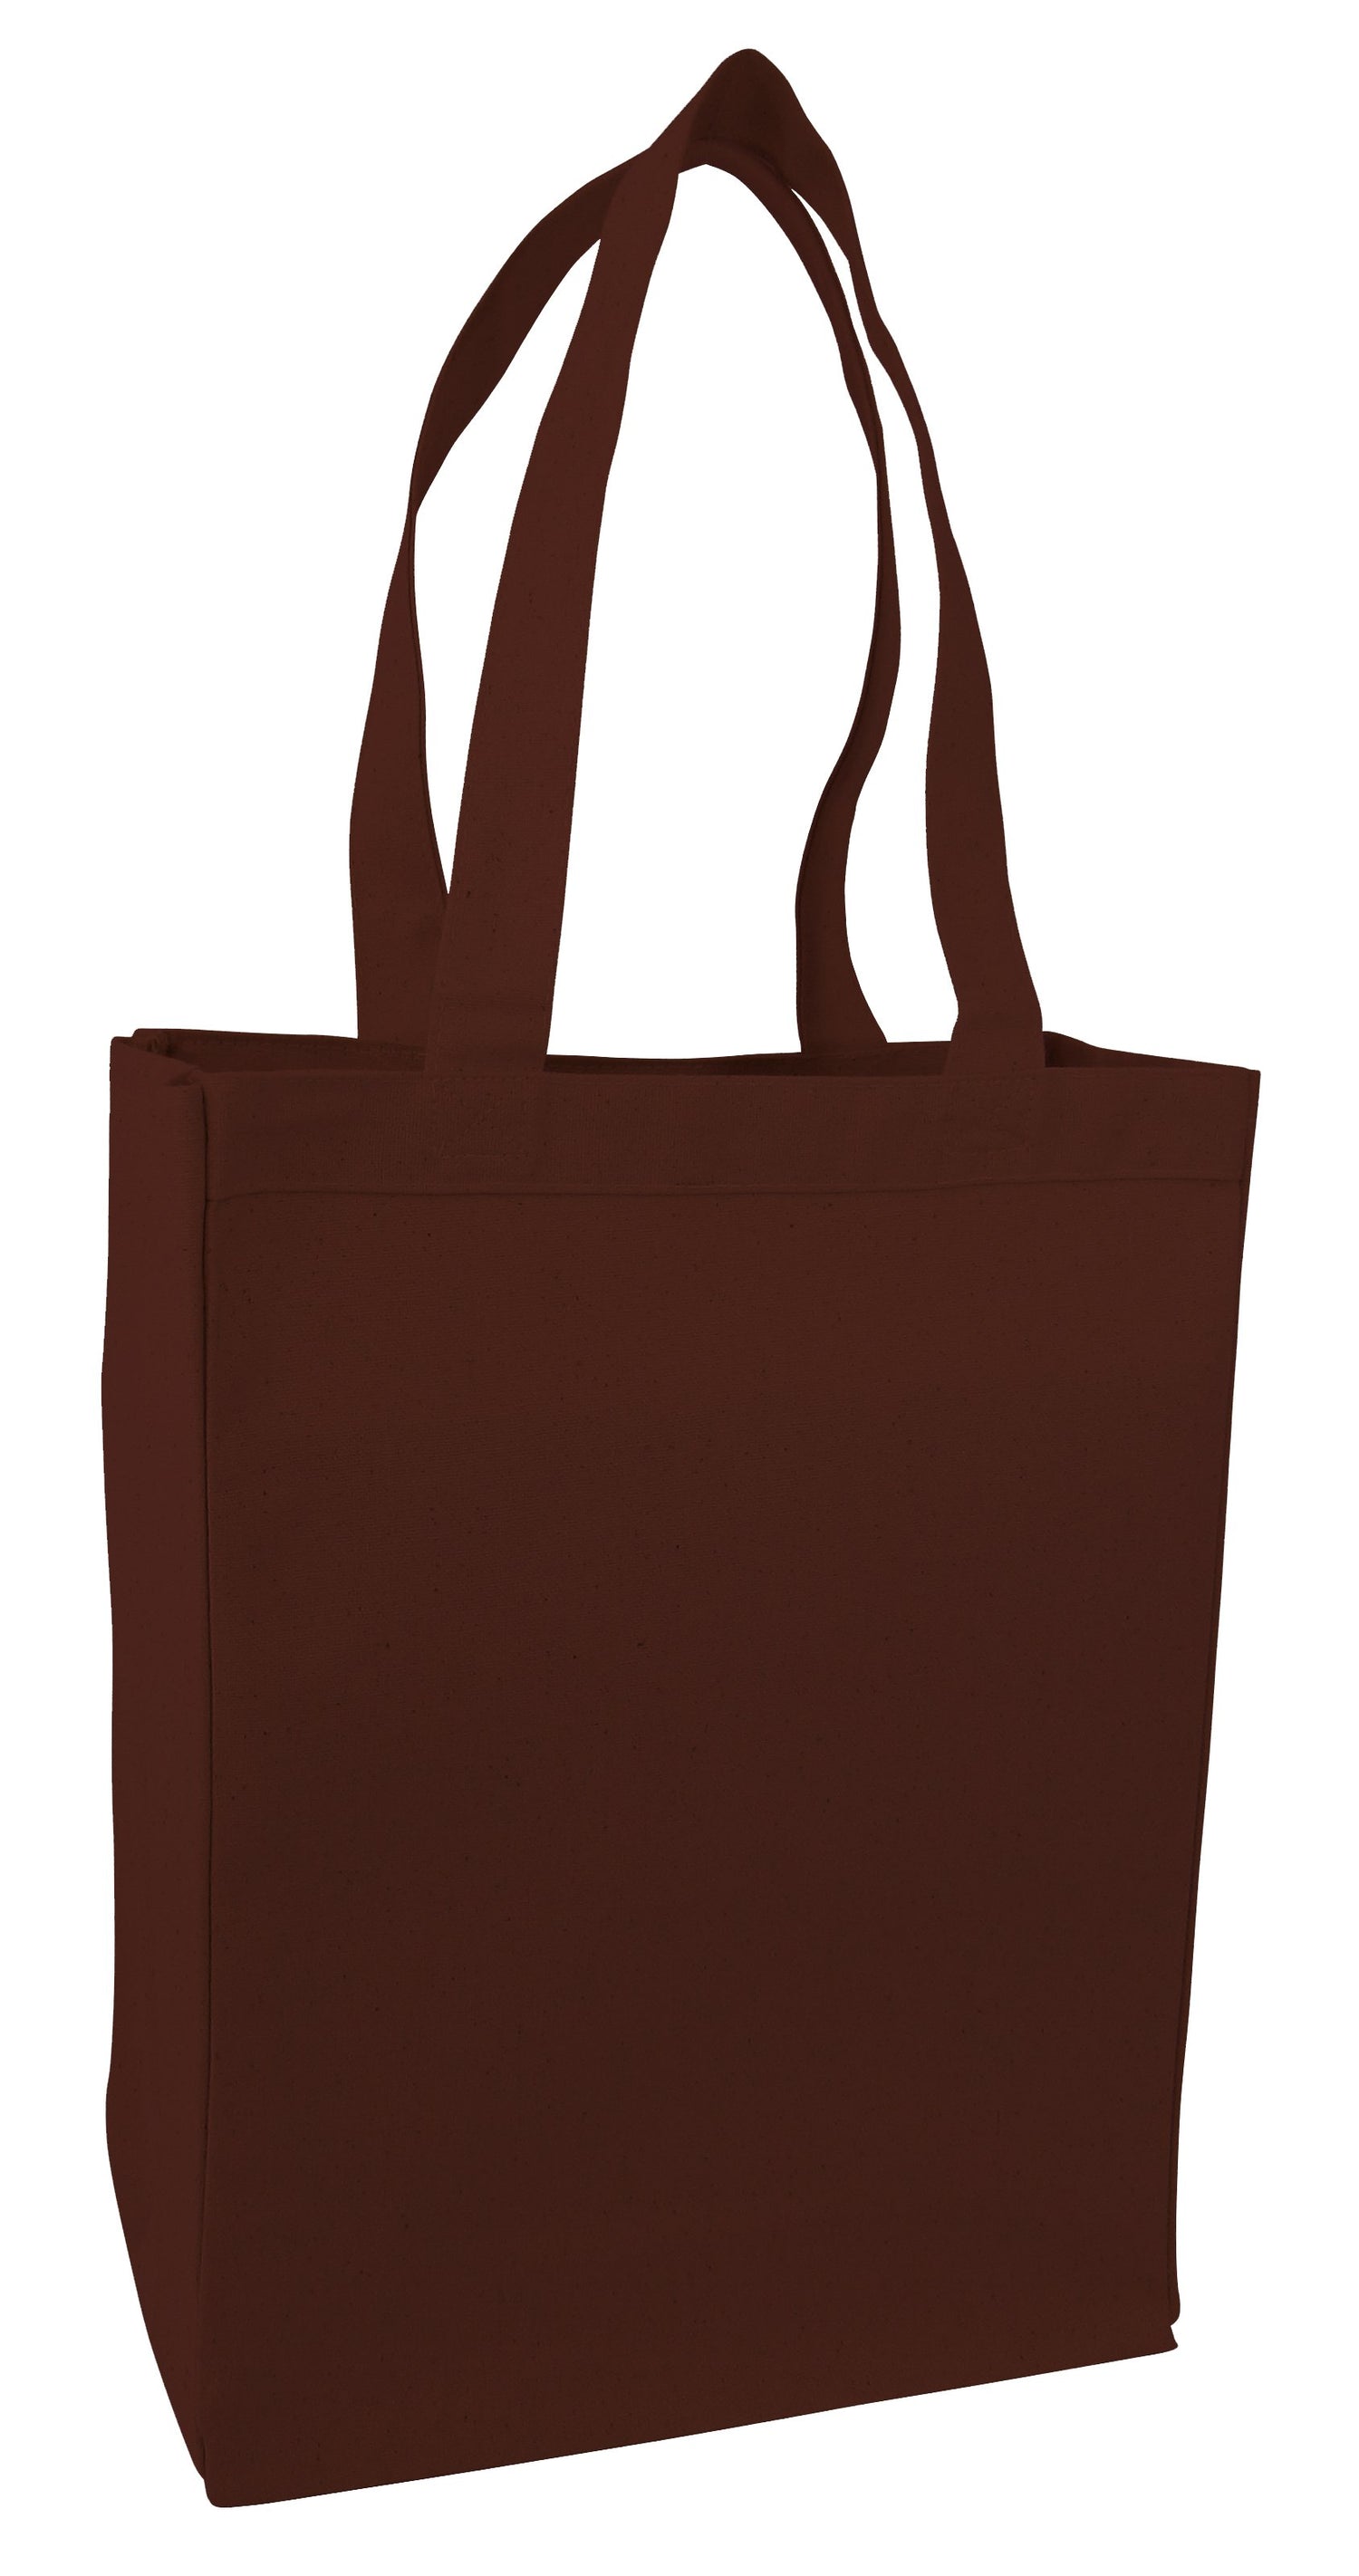 Heavy Canvas Shopping Tote bags,Wholesale canvas tote bags,Cheap totes